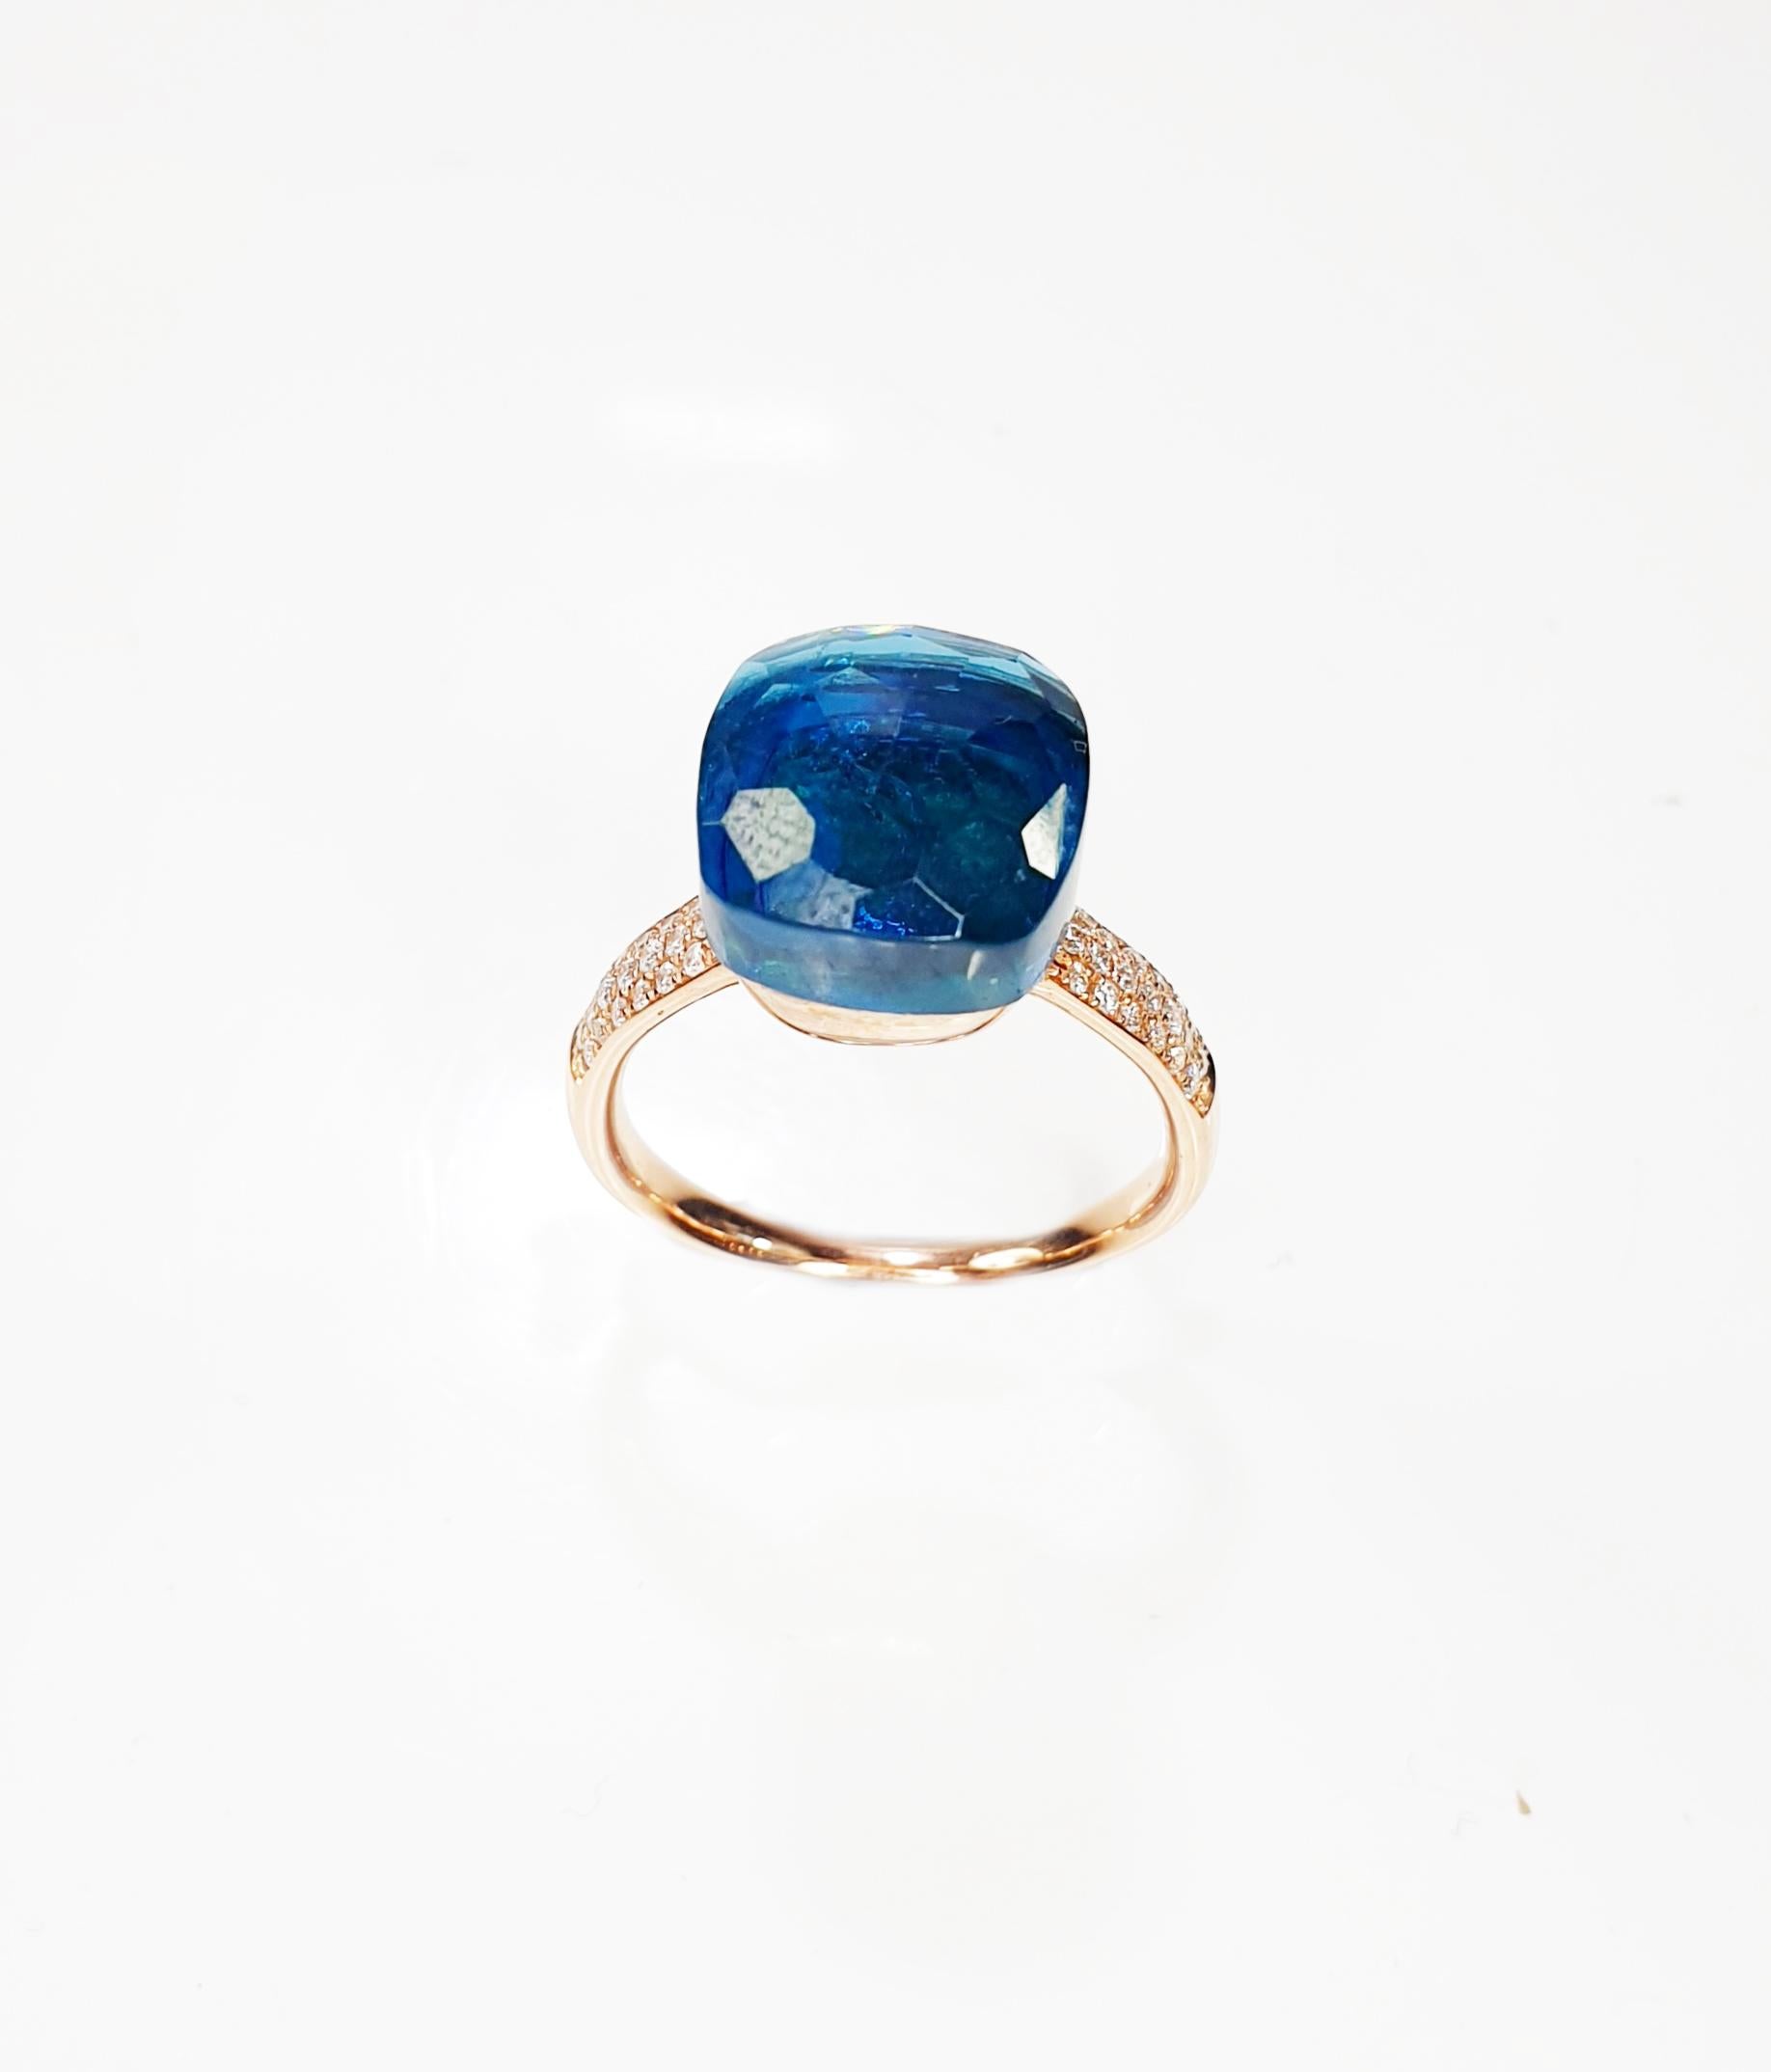 Multifaceted Medium Blue london topazin 18k rose gold and pavé of diamonds ring 
Rings and earrings in a varied selection of 18 colours and gems see attach below 
Rings and earrings in a varied selection of 18 colours and gems see below
◘ Weight